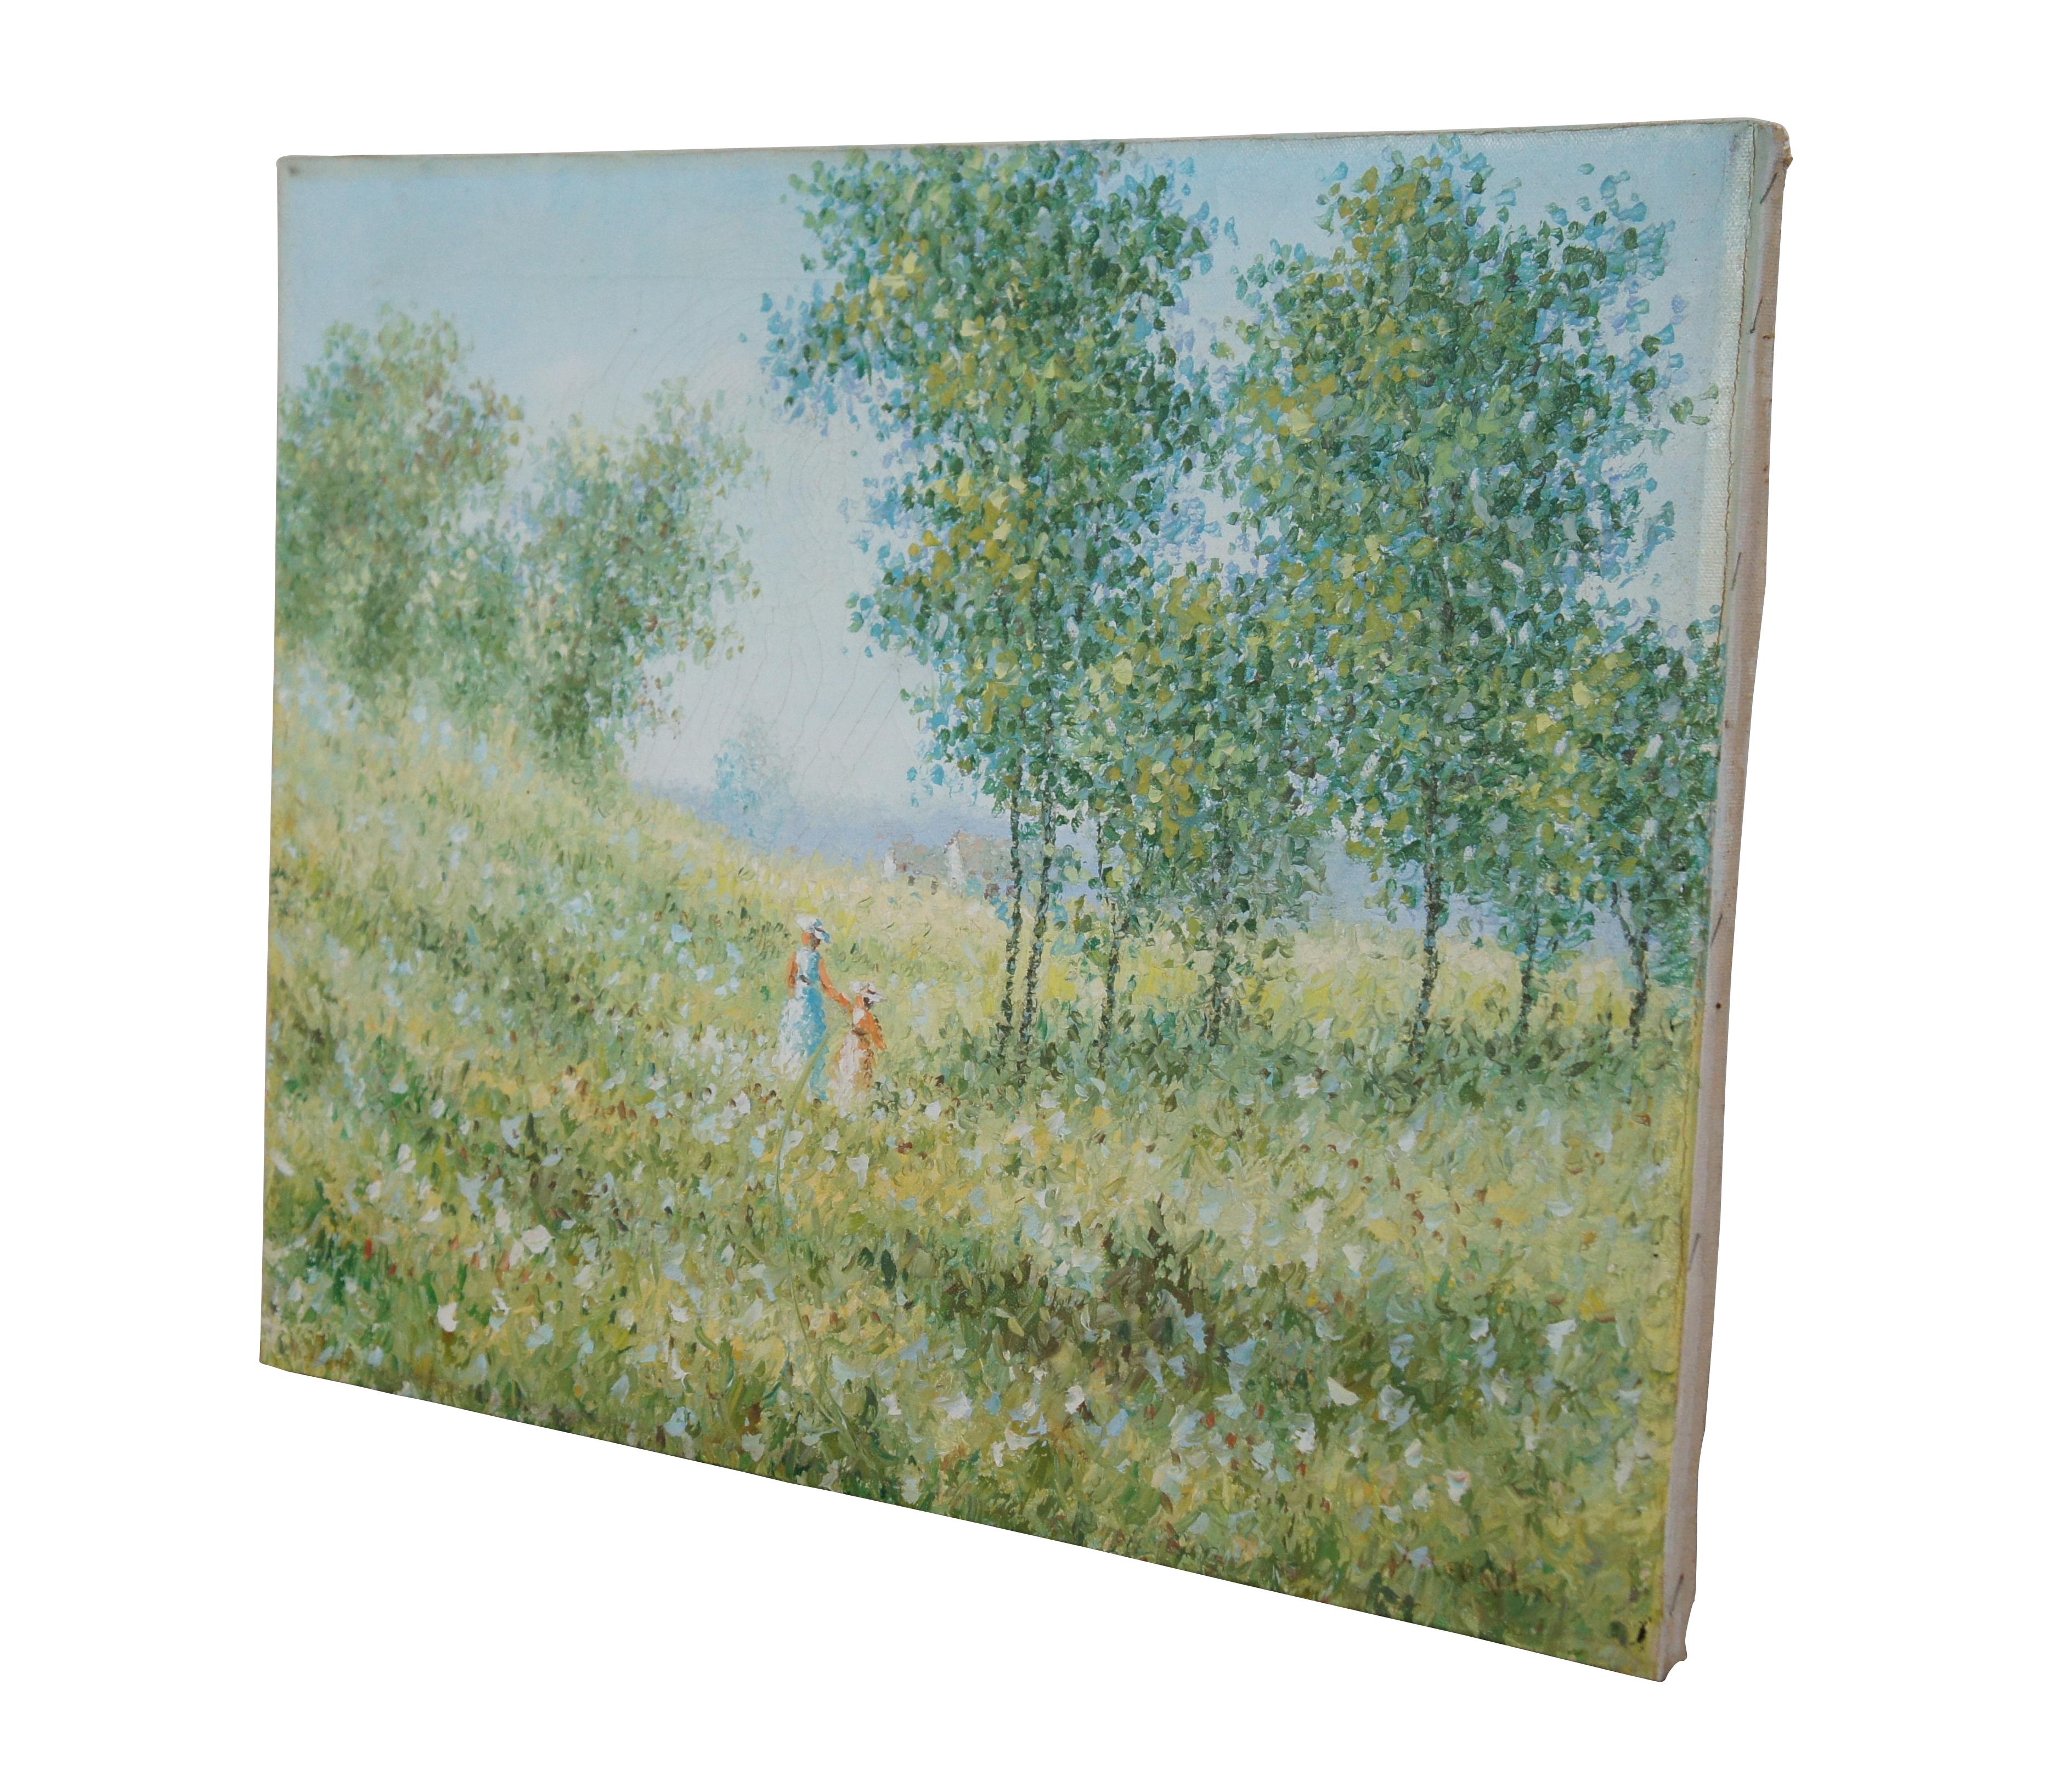 Vintage original Impressionist landscape oil painting on canvas showing a green field with trees and a pair of figures walking toward a cottage. Signed lower right, V. Noorole (Nookole / Noopole?). Size: 20